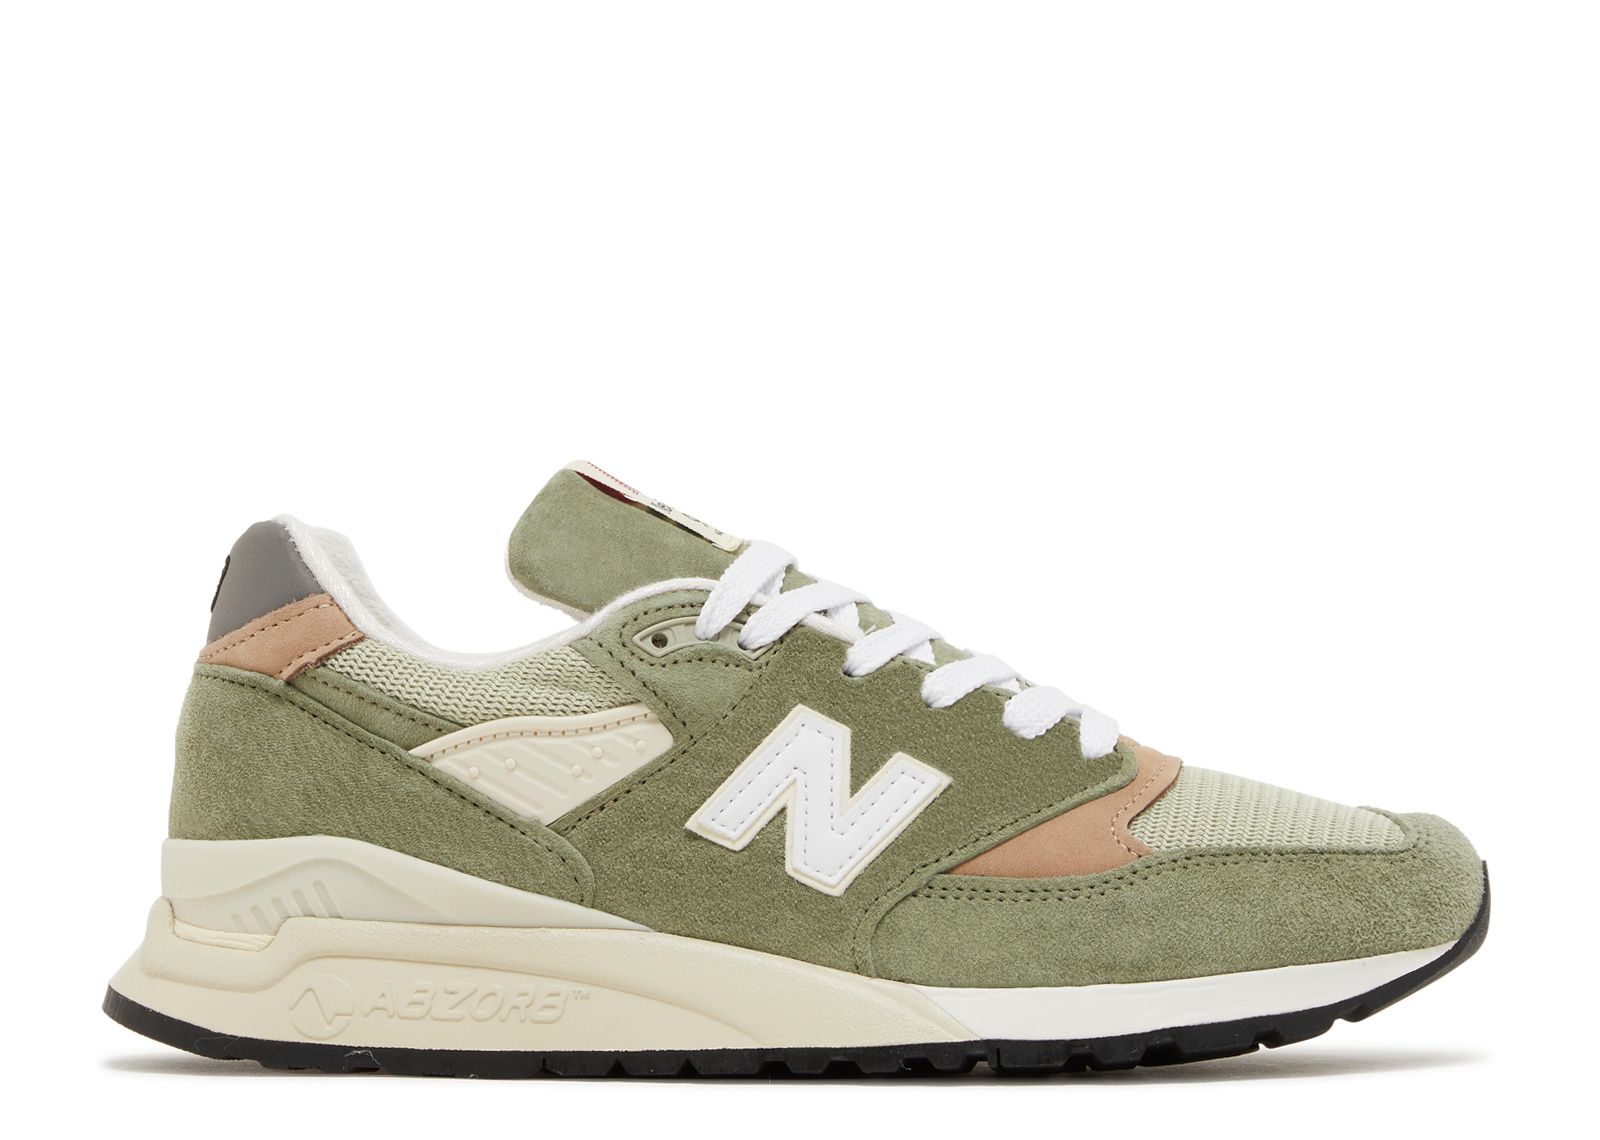 Teddy Santis X 998 Made In USA 'Olive Incense' - New Balance